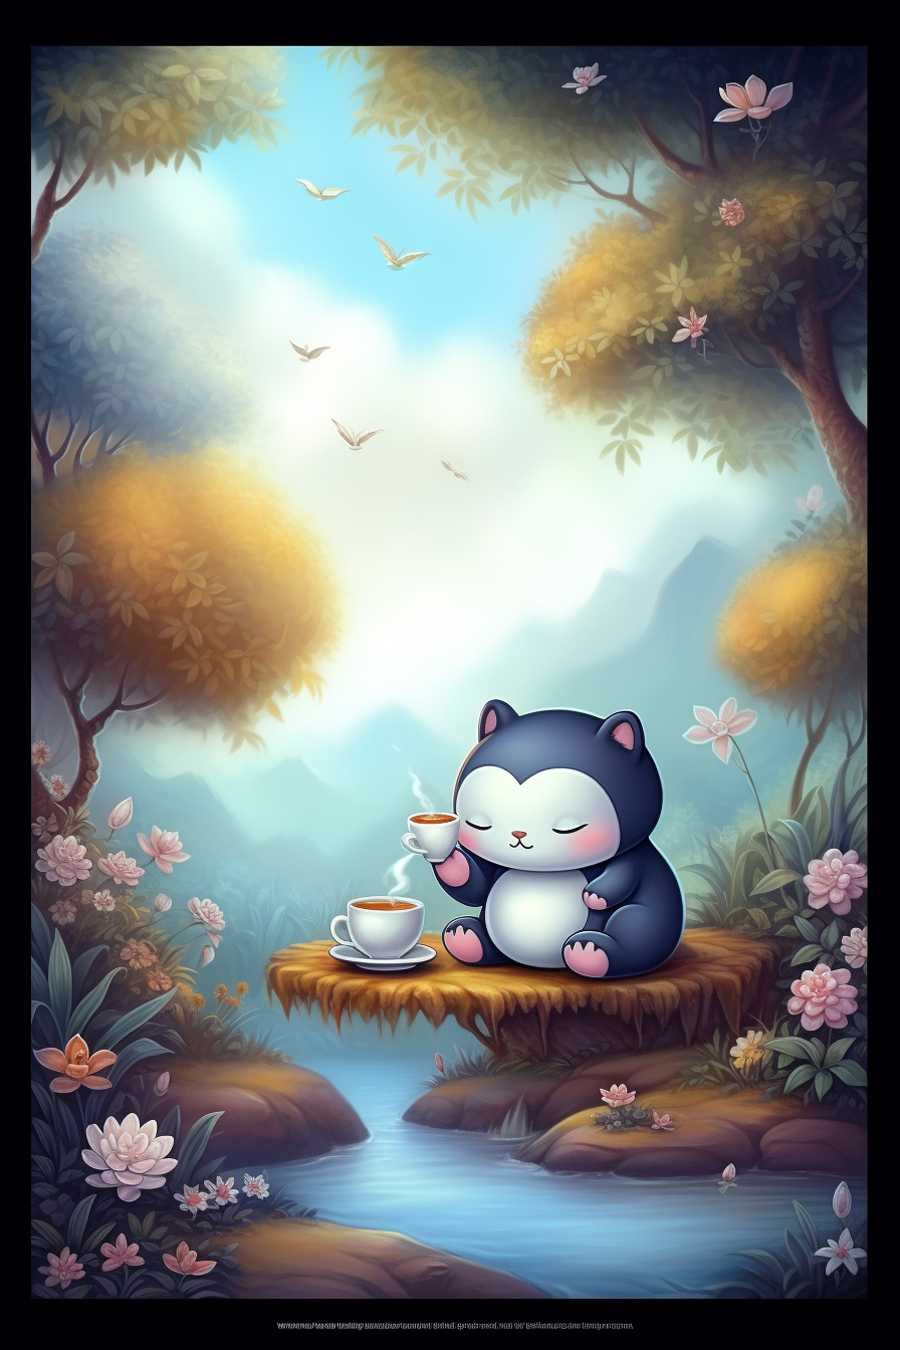 An illustration of a cat sitting on a river with a cup of tea.